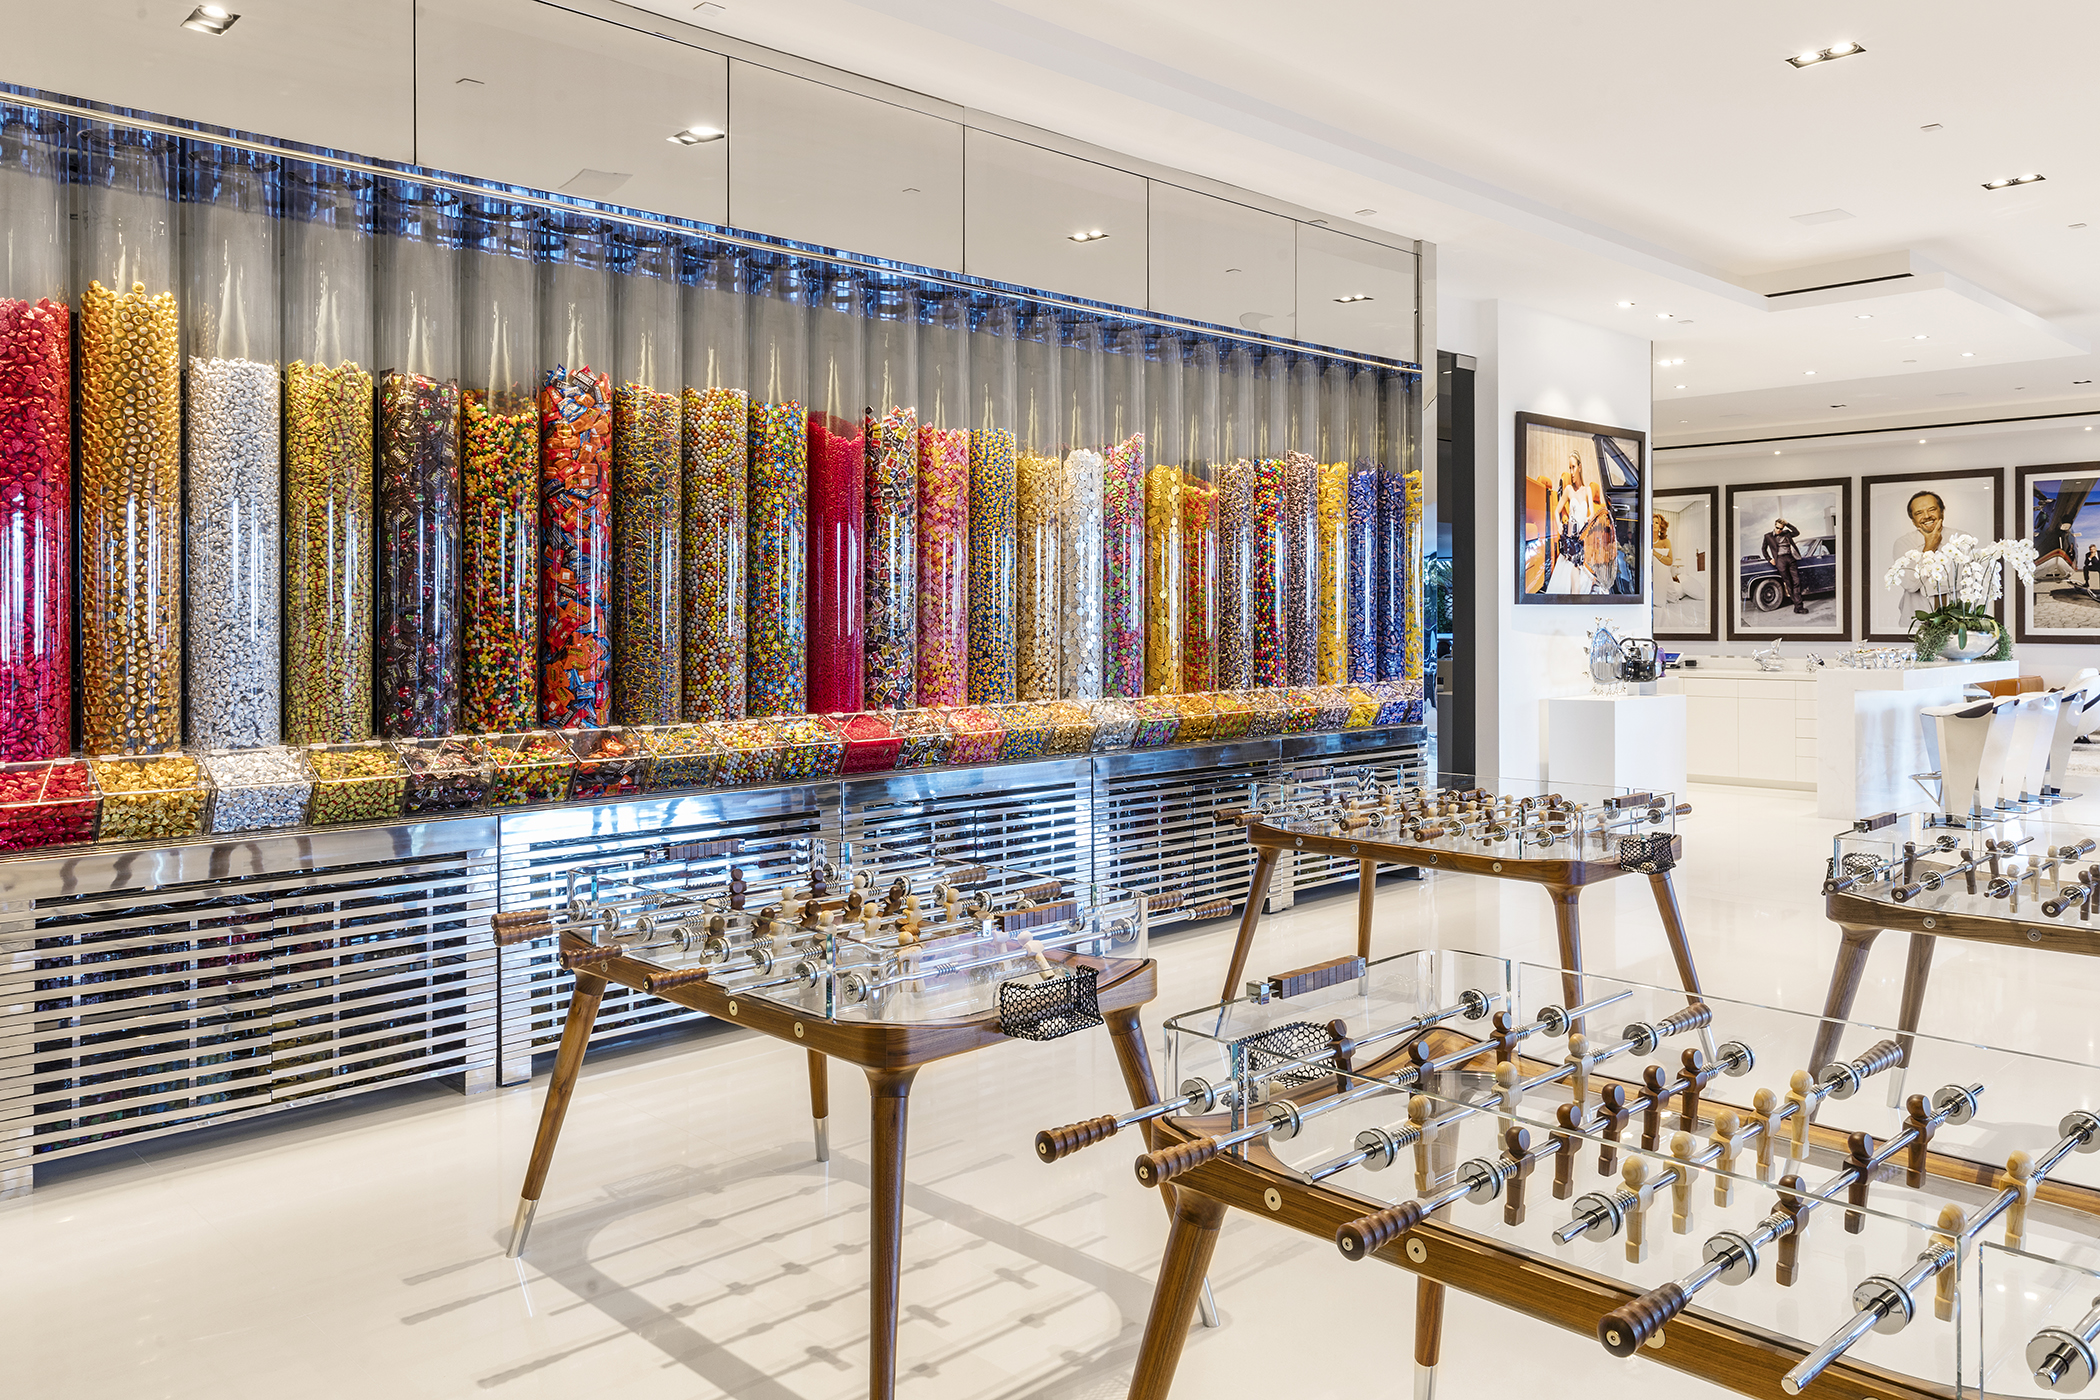 $250 Million Bel Air Home Candy Wall